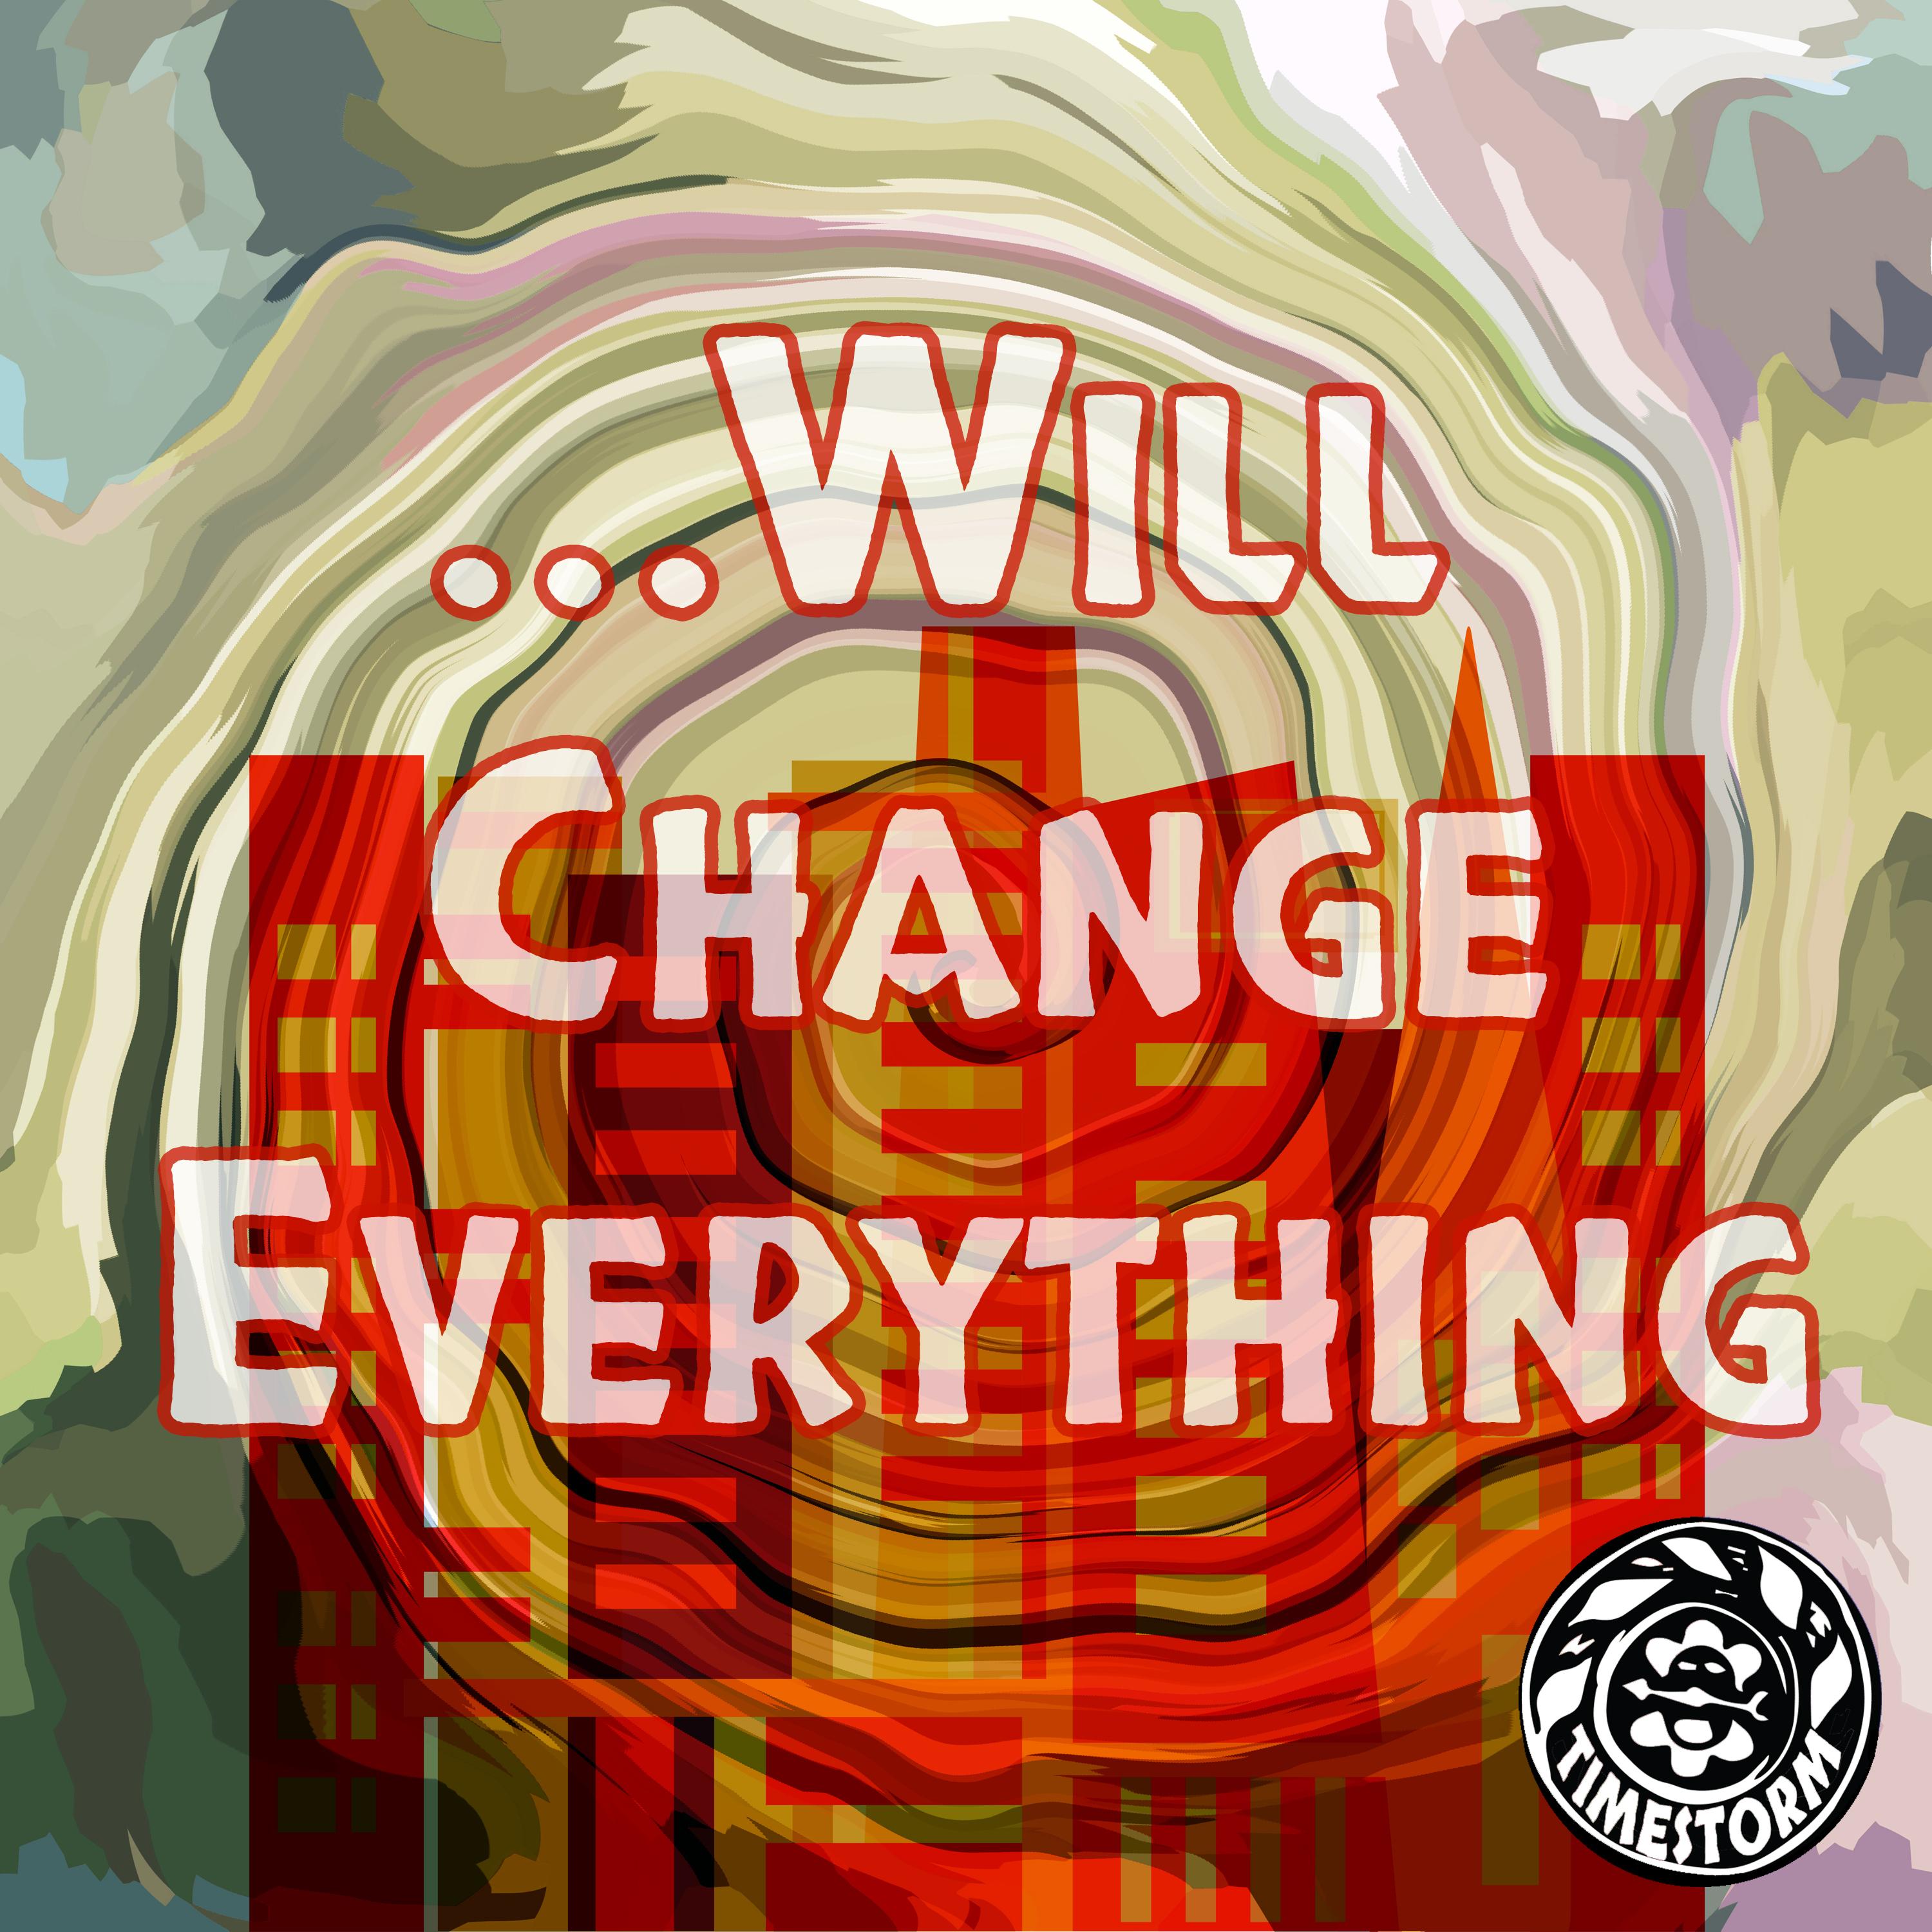 Thumbnail for "Episode 2: ...Will Change Everything".